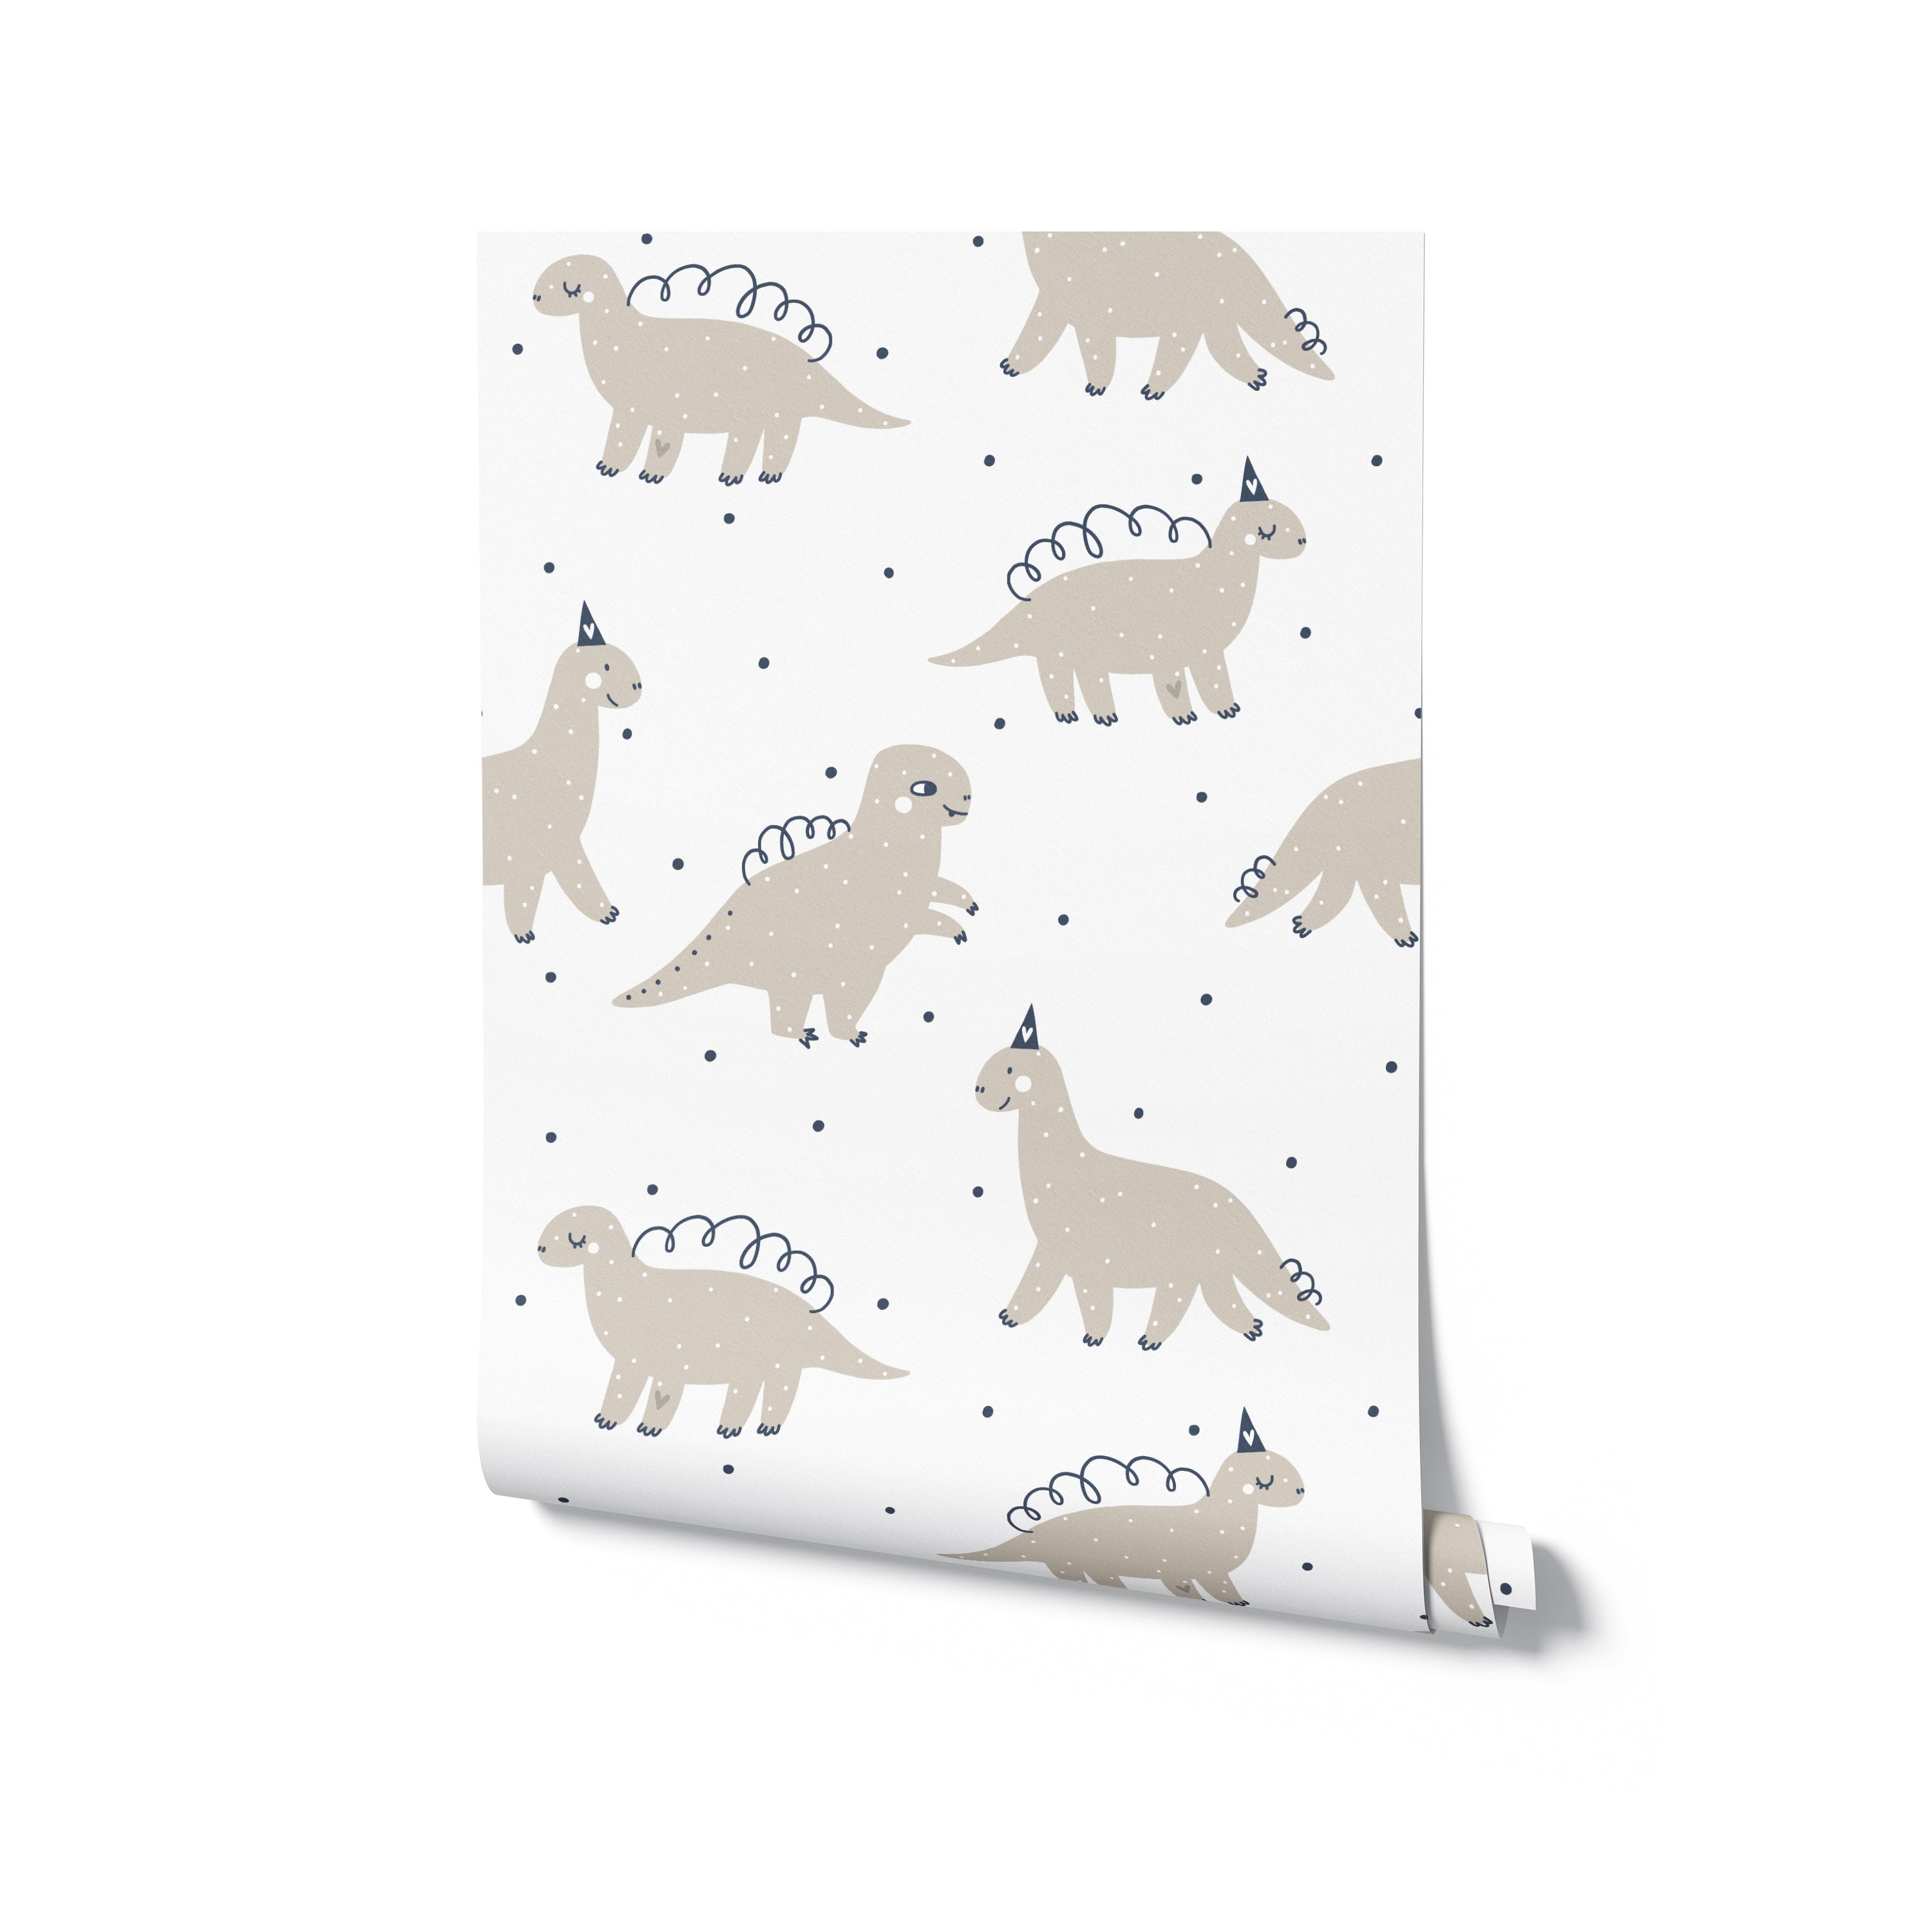 Rolled sample of Dino Party Wallpaper, displaying a repeat pattern of beige dinosaurs with party hats and playful poses on a white background with black dot accents, perfect for adding a charming and imaginative touch to children’s spaces